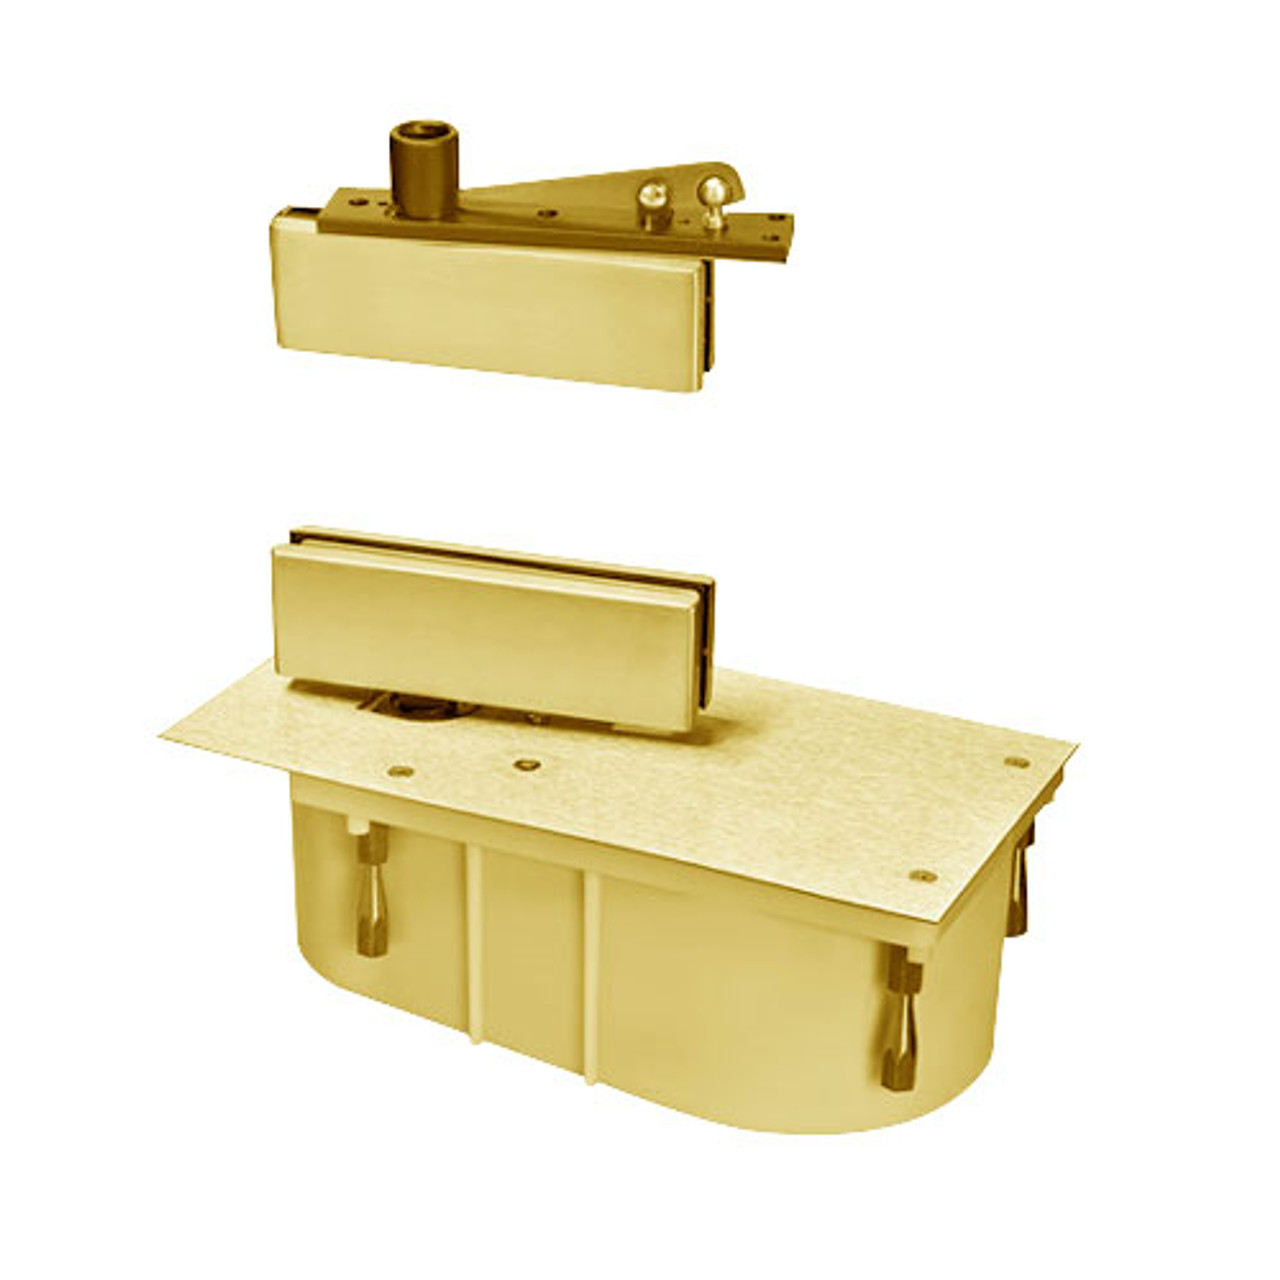 428-95S-LFP-CWF-LH-605 Rixson 428 Series Heavy Duty Single Acting Center Hung Floor Closer with Patch Fittings in Bright Brass Finish